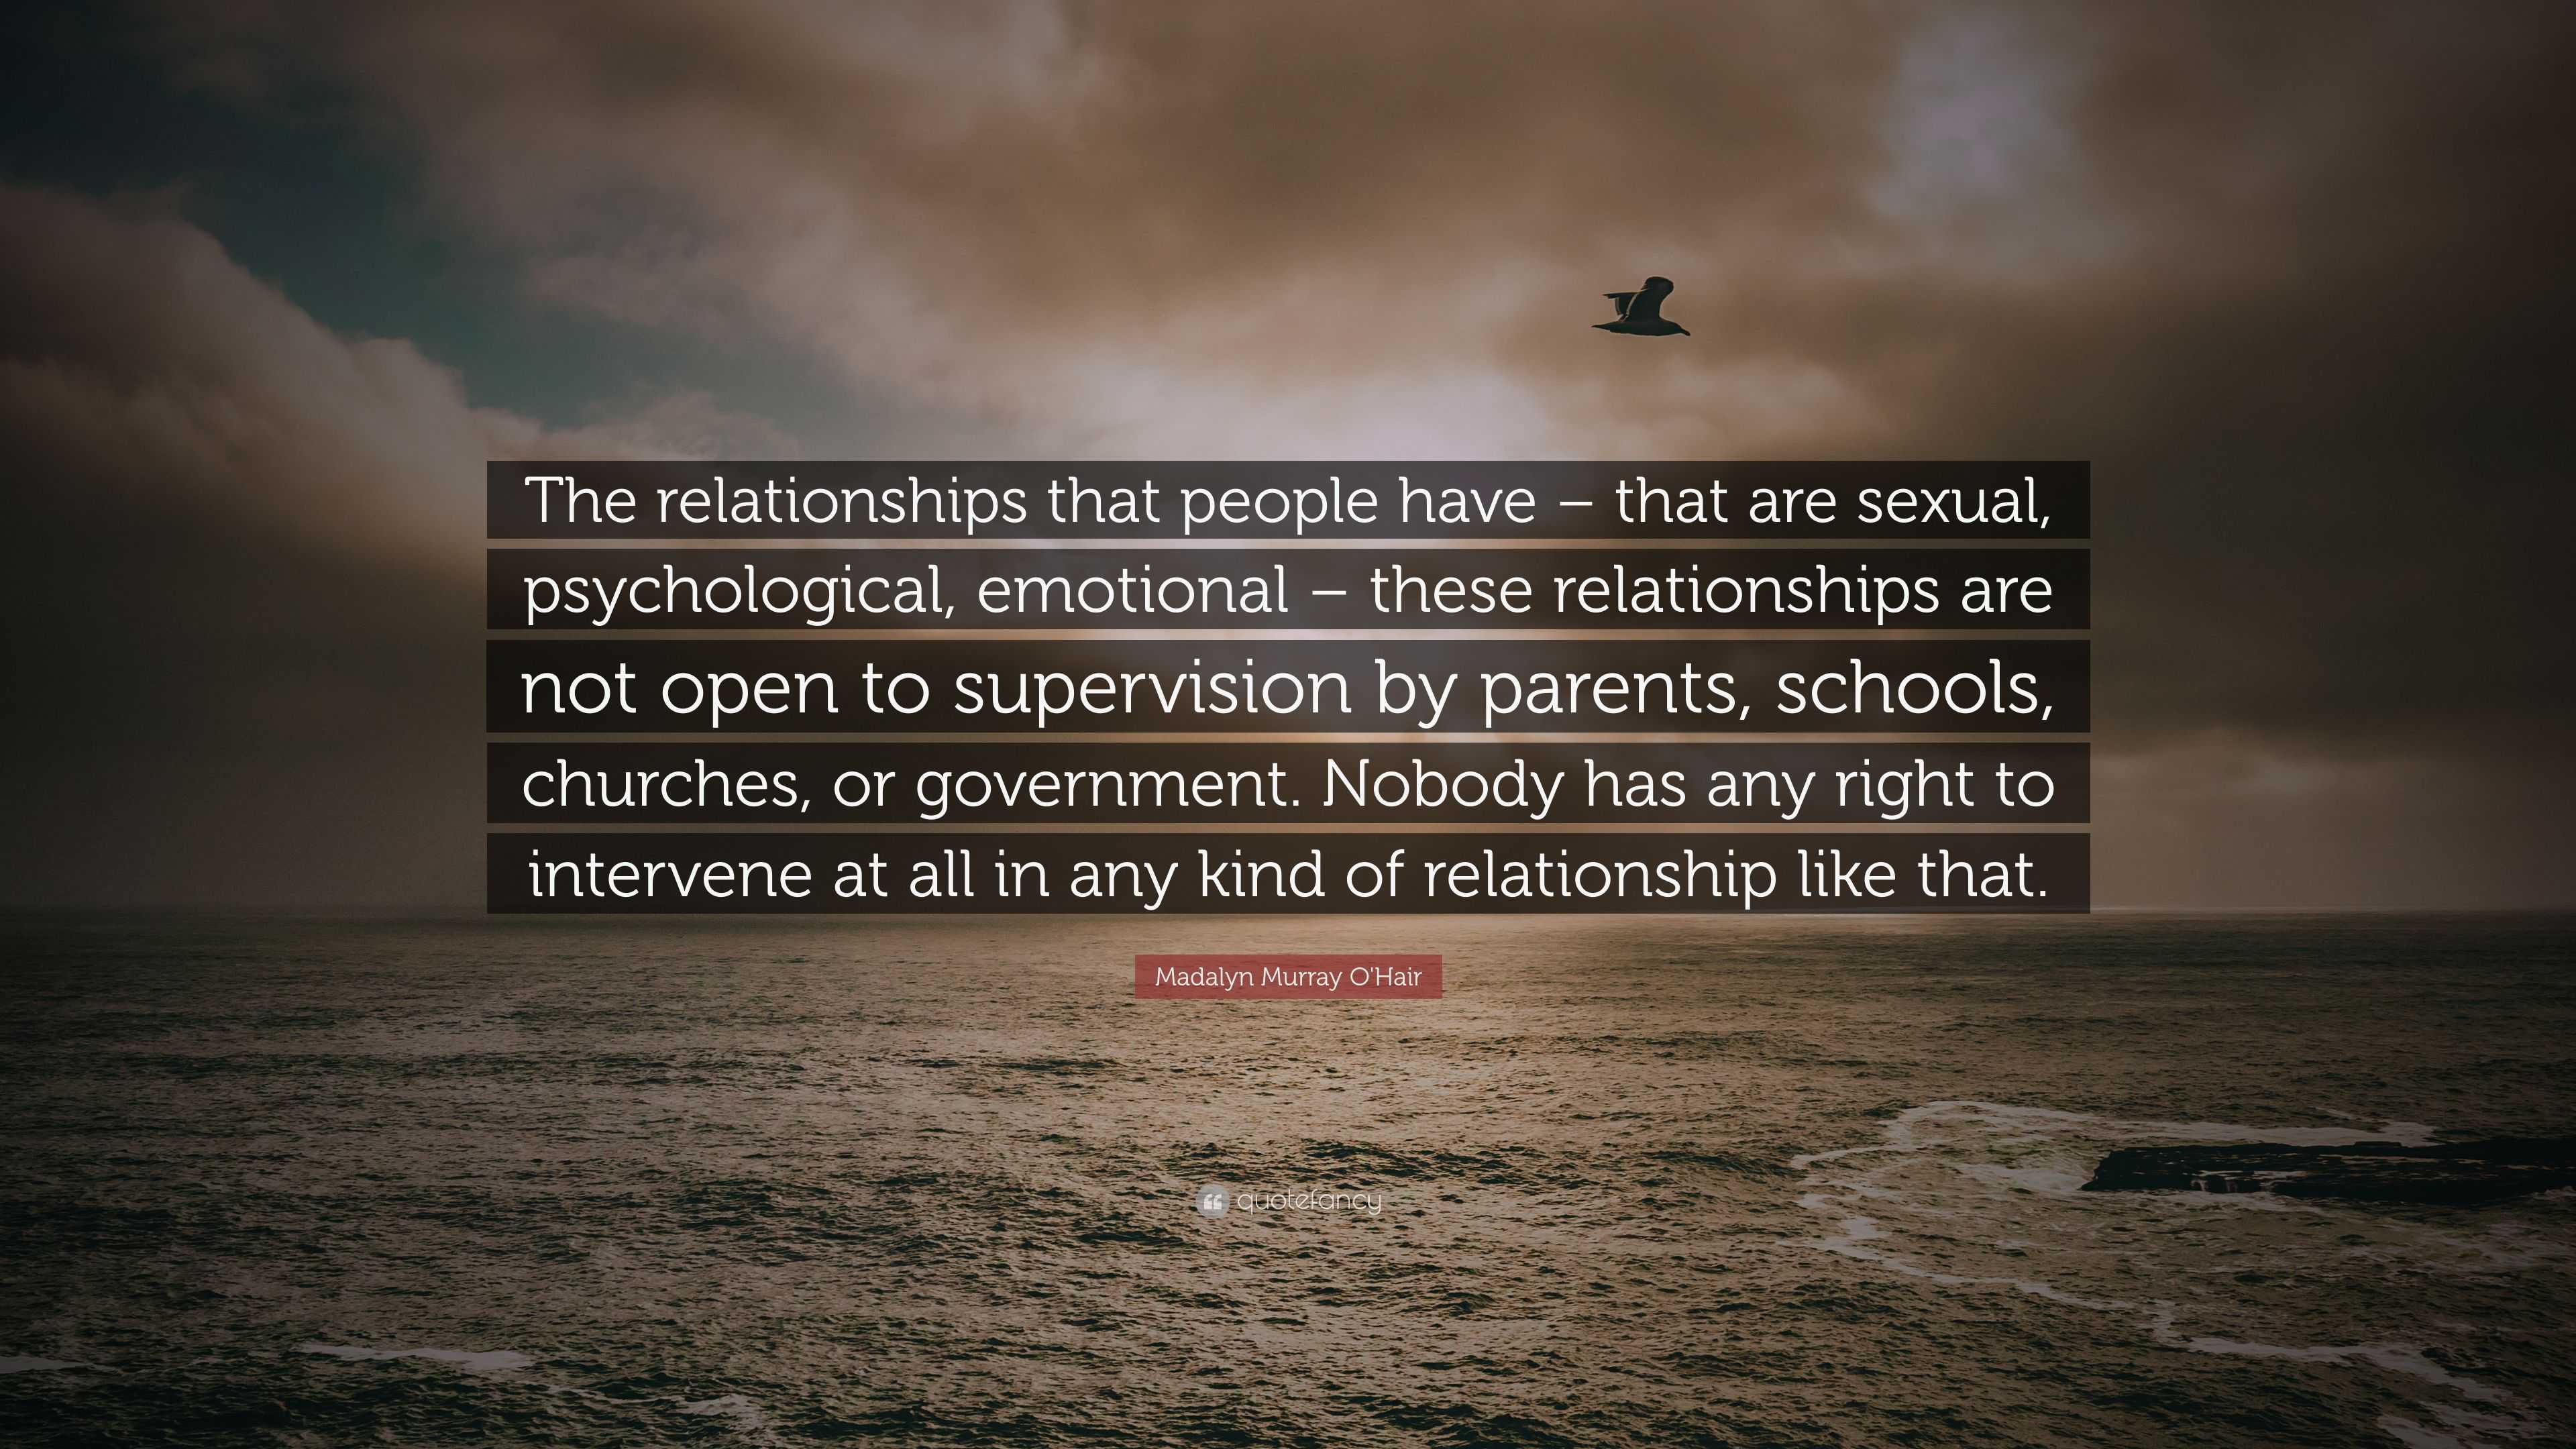 Madalyn Murray O'Hair Quote: “The relationships that people have – that are  sexual, psychological, emotional – these relationships are not open to  sup...”